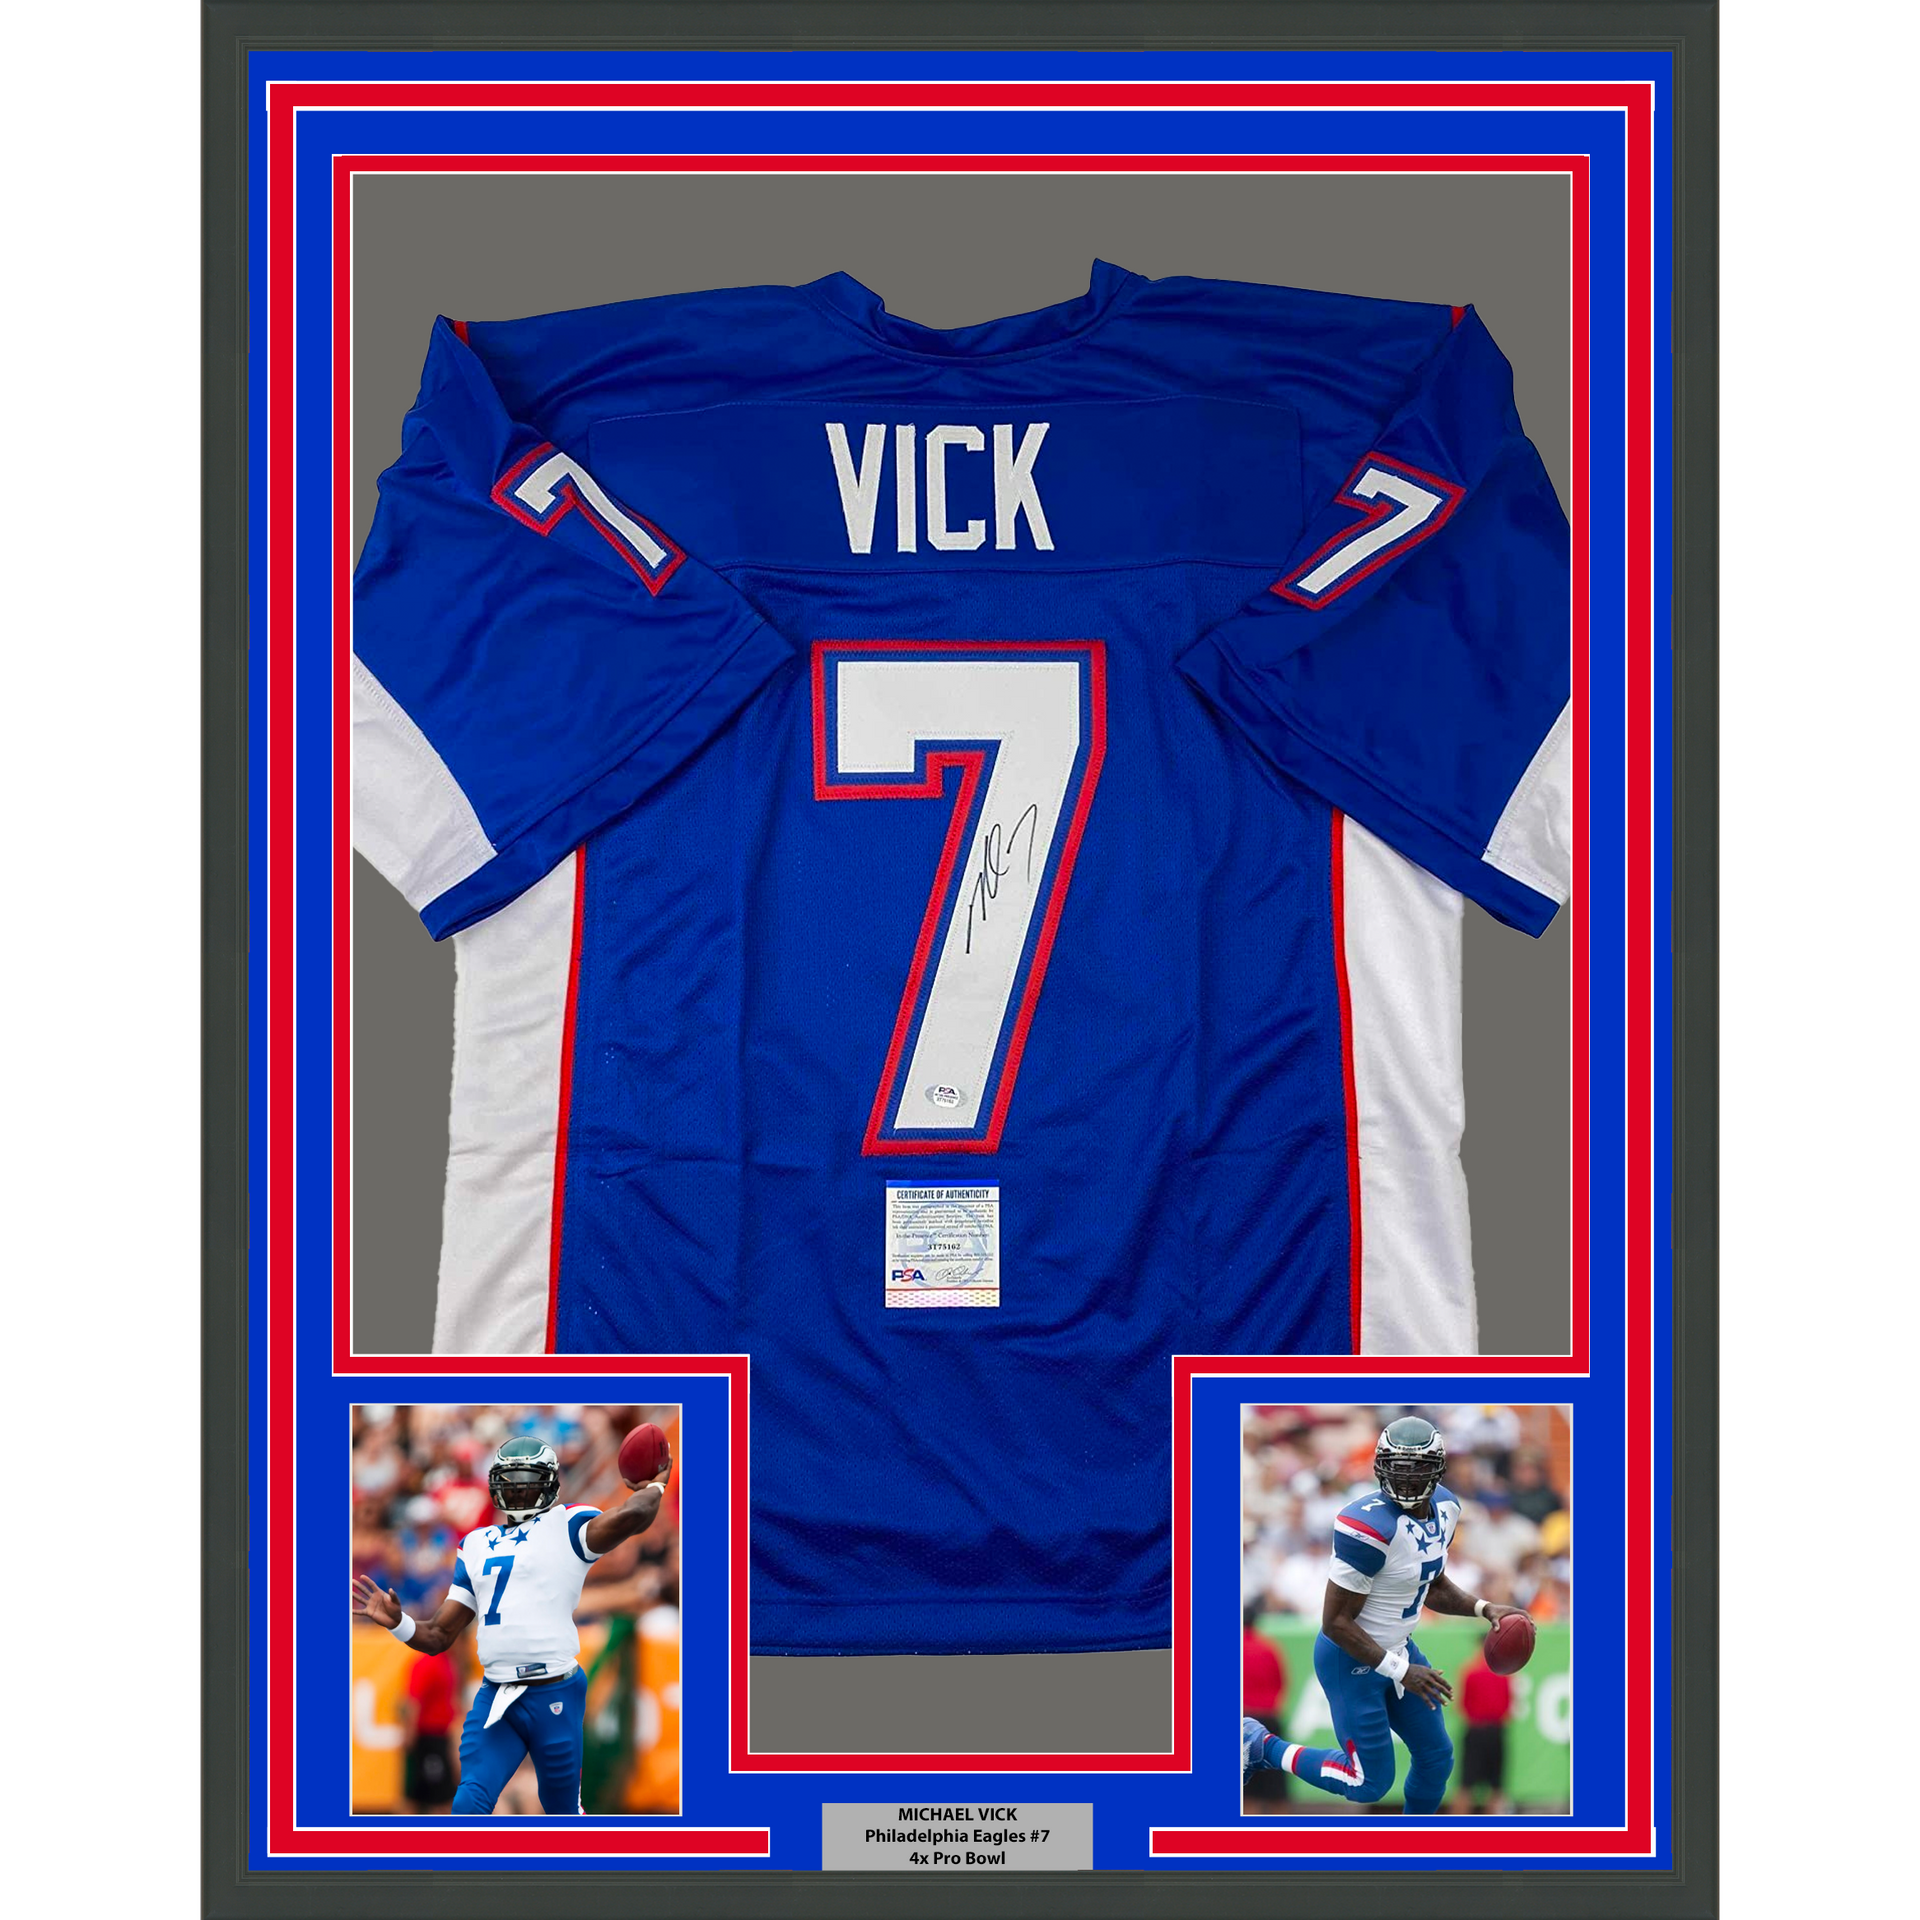 Framed Autographed/Signed Michael Mike Vick 33x42 Pro Bowl Blue Football  Jersey PSA/DNA COA - Hall of Fame Sports Memorabilia